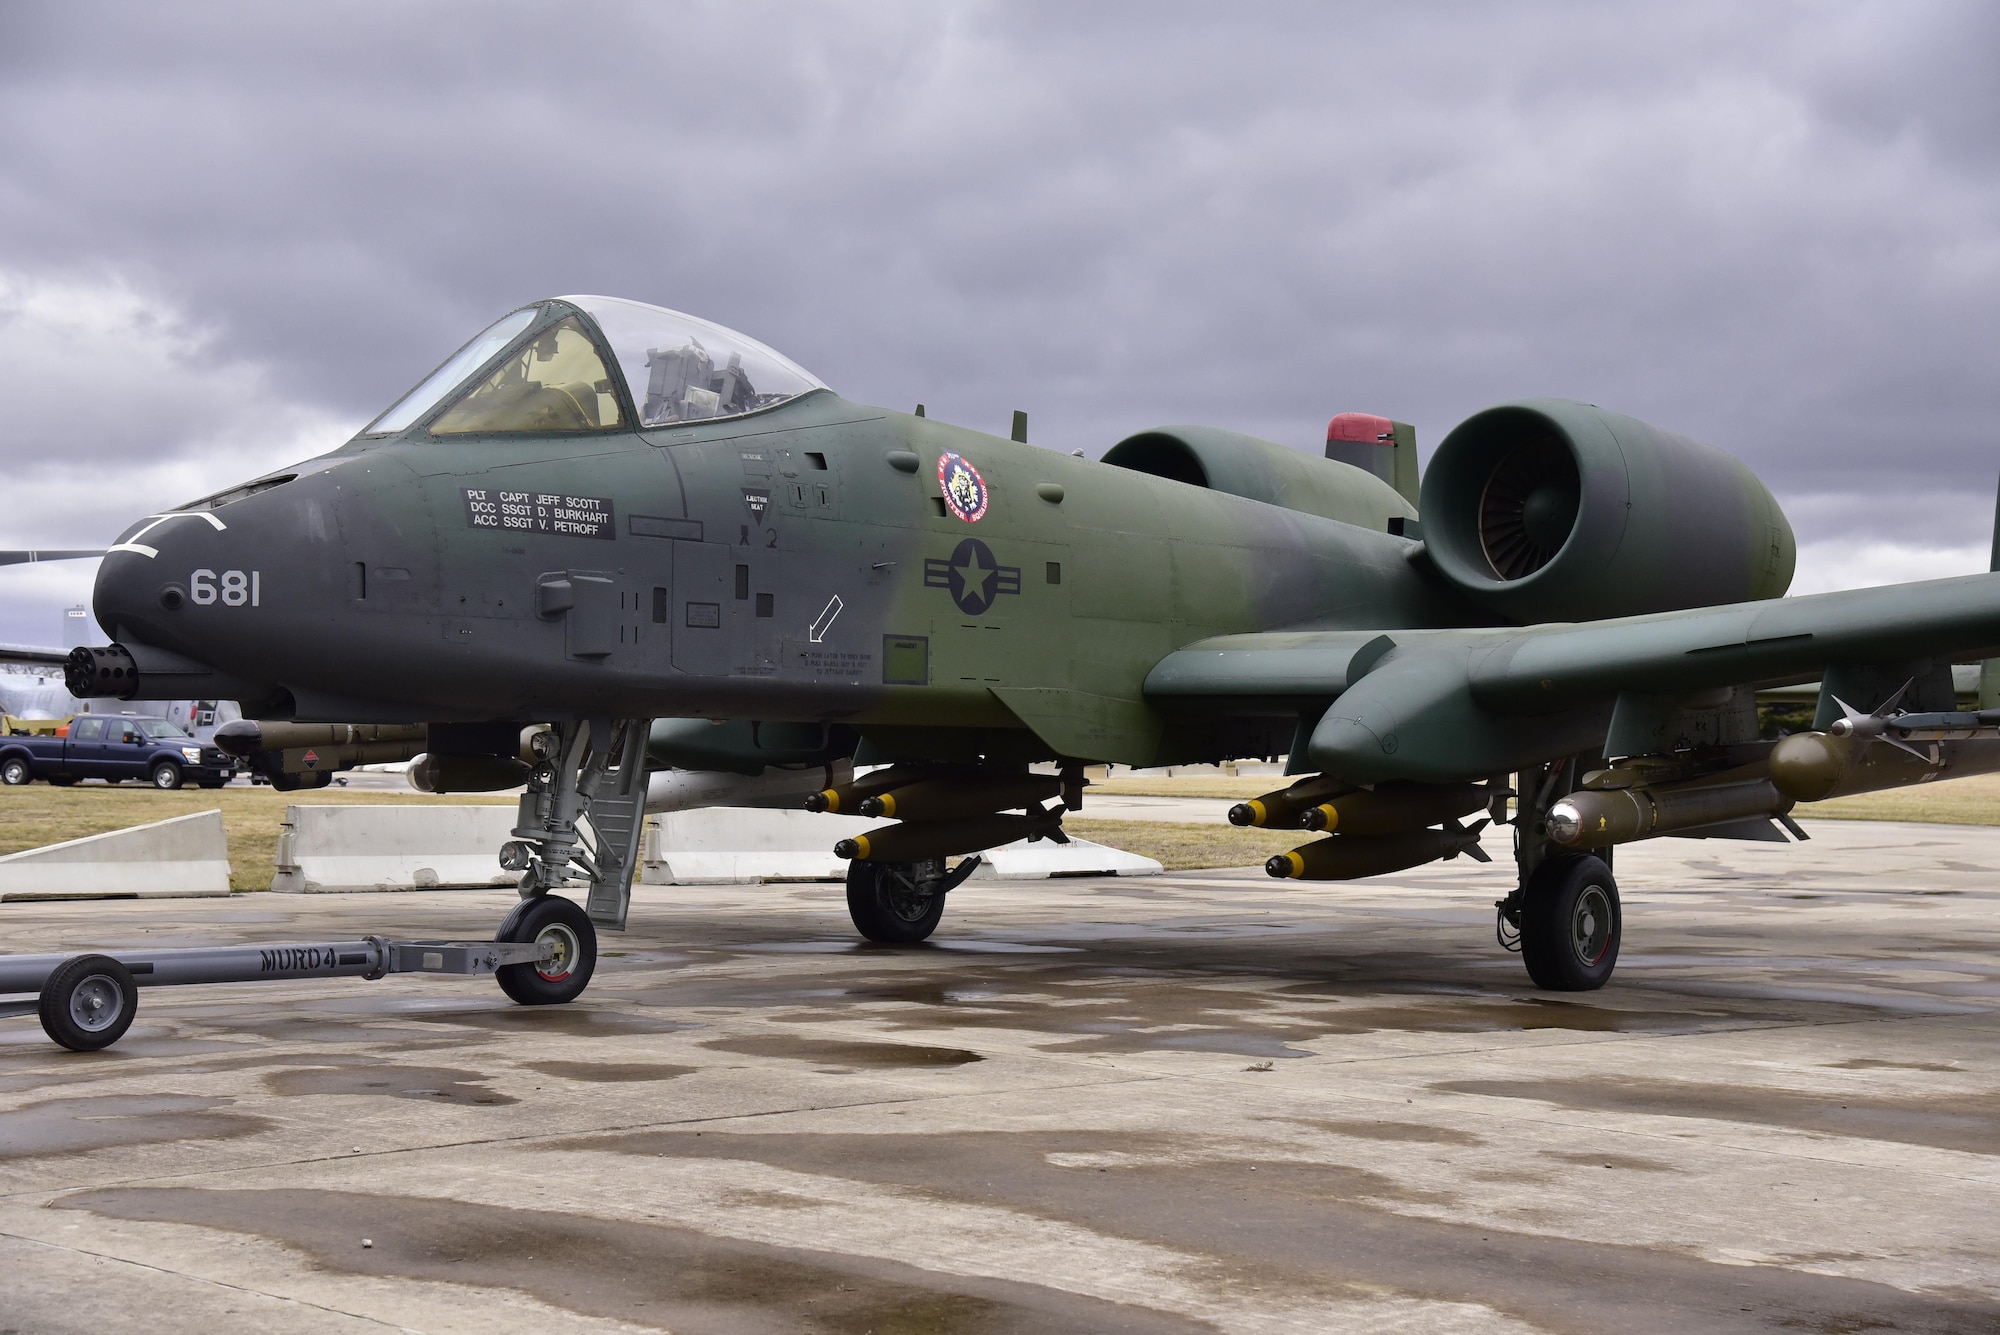 DAYTON, Ohio -- Fairchild Republic A-10A Thunderbolt II   being moved into position in the Cold War Gallery at the National Museum of the United States Air Force. The restoration crew members worked as part of a team to complete the gallery reconfiguration on Jan. 26, 2017. (U.S. Air Force photo)